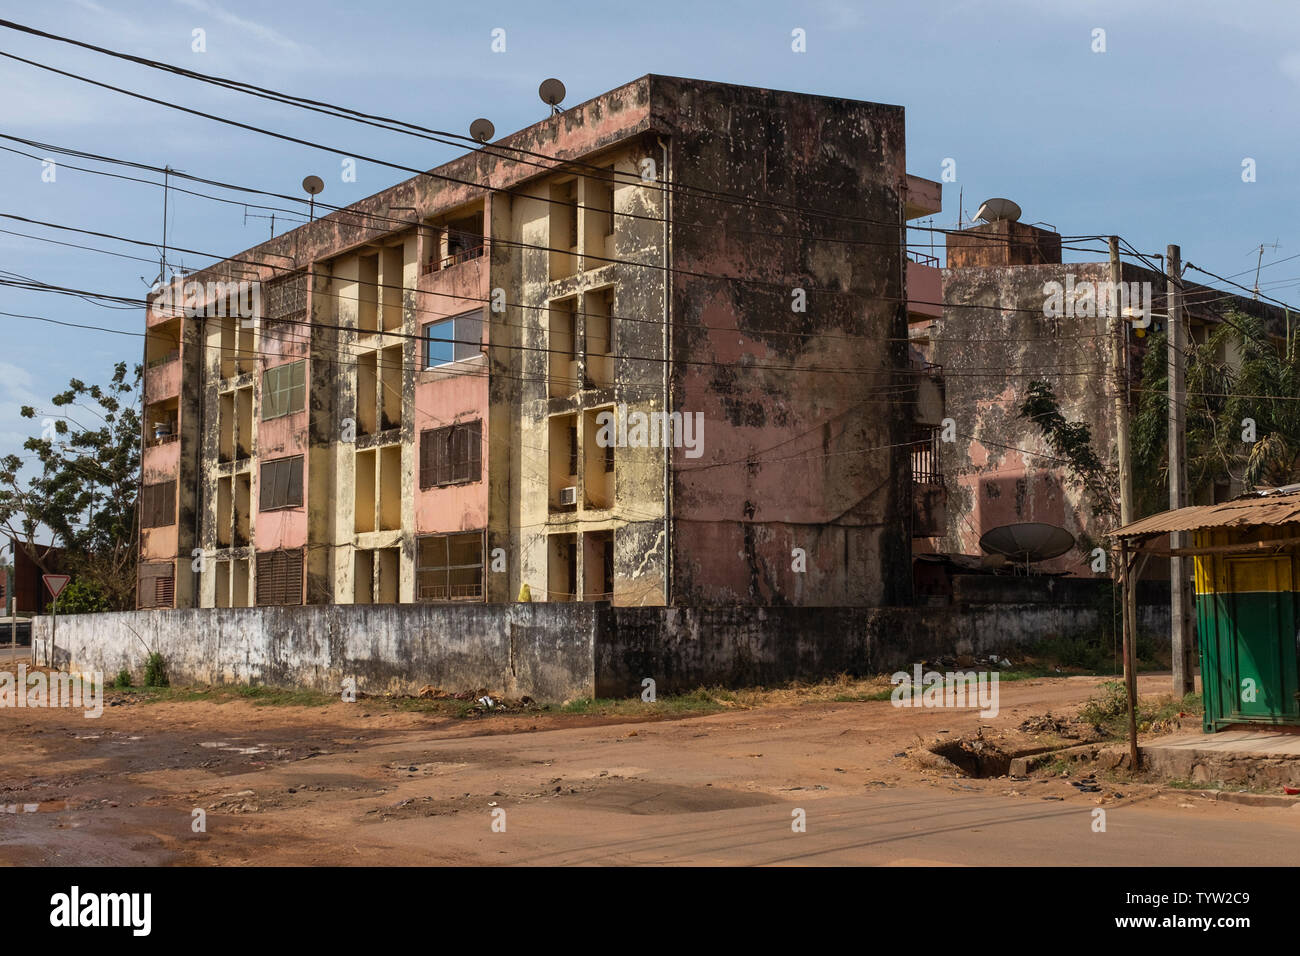 View of old residential buildings in the city of Bissau, Guinea Bissau Stock Photo